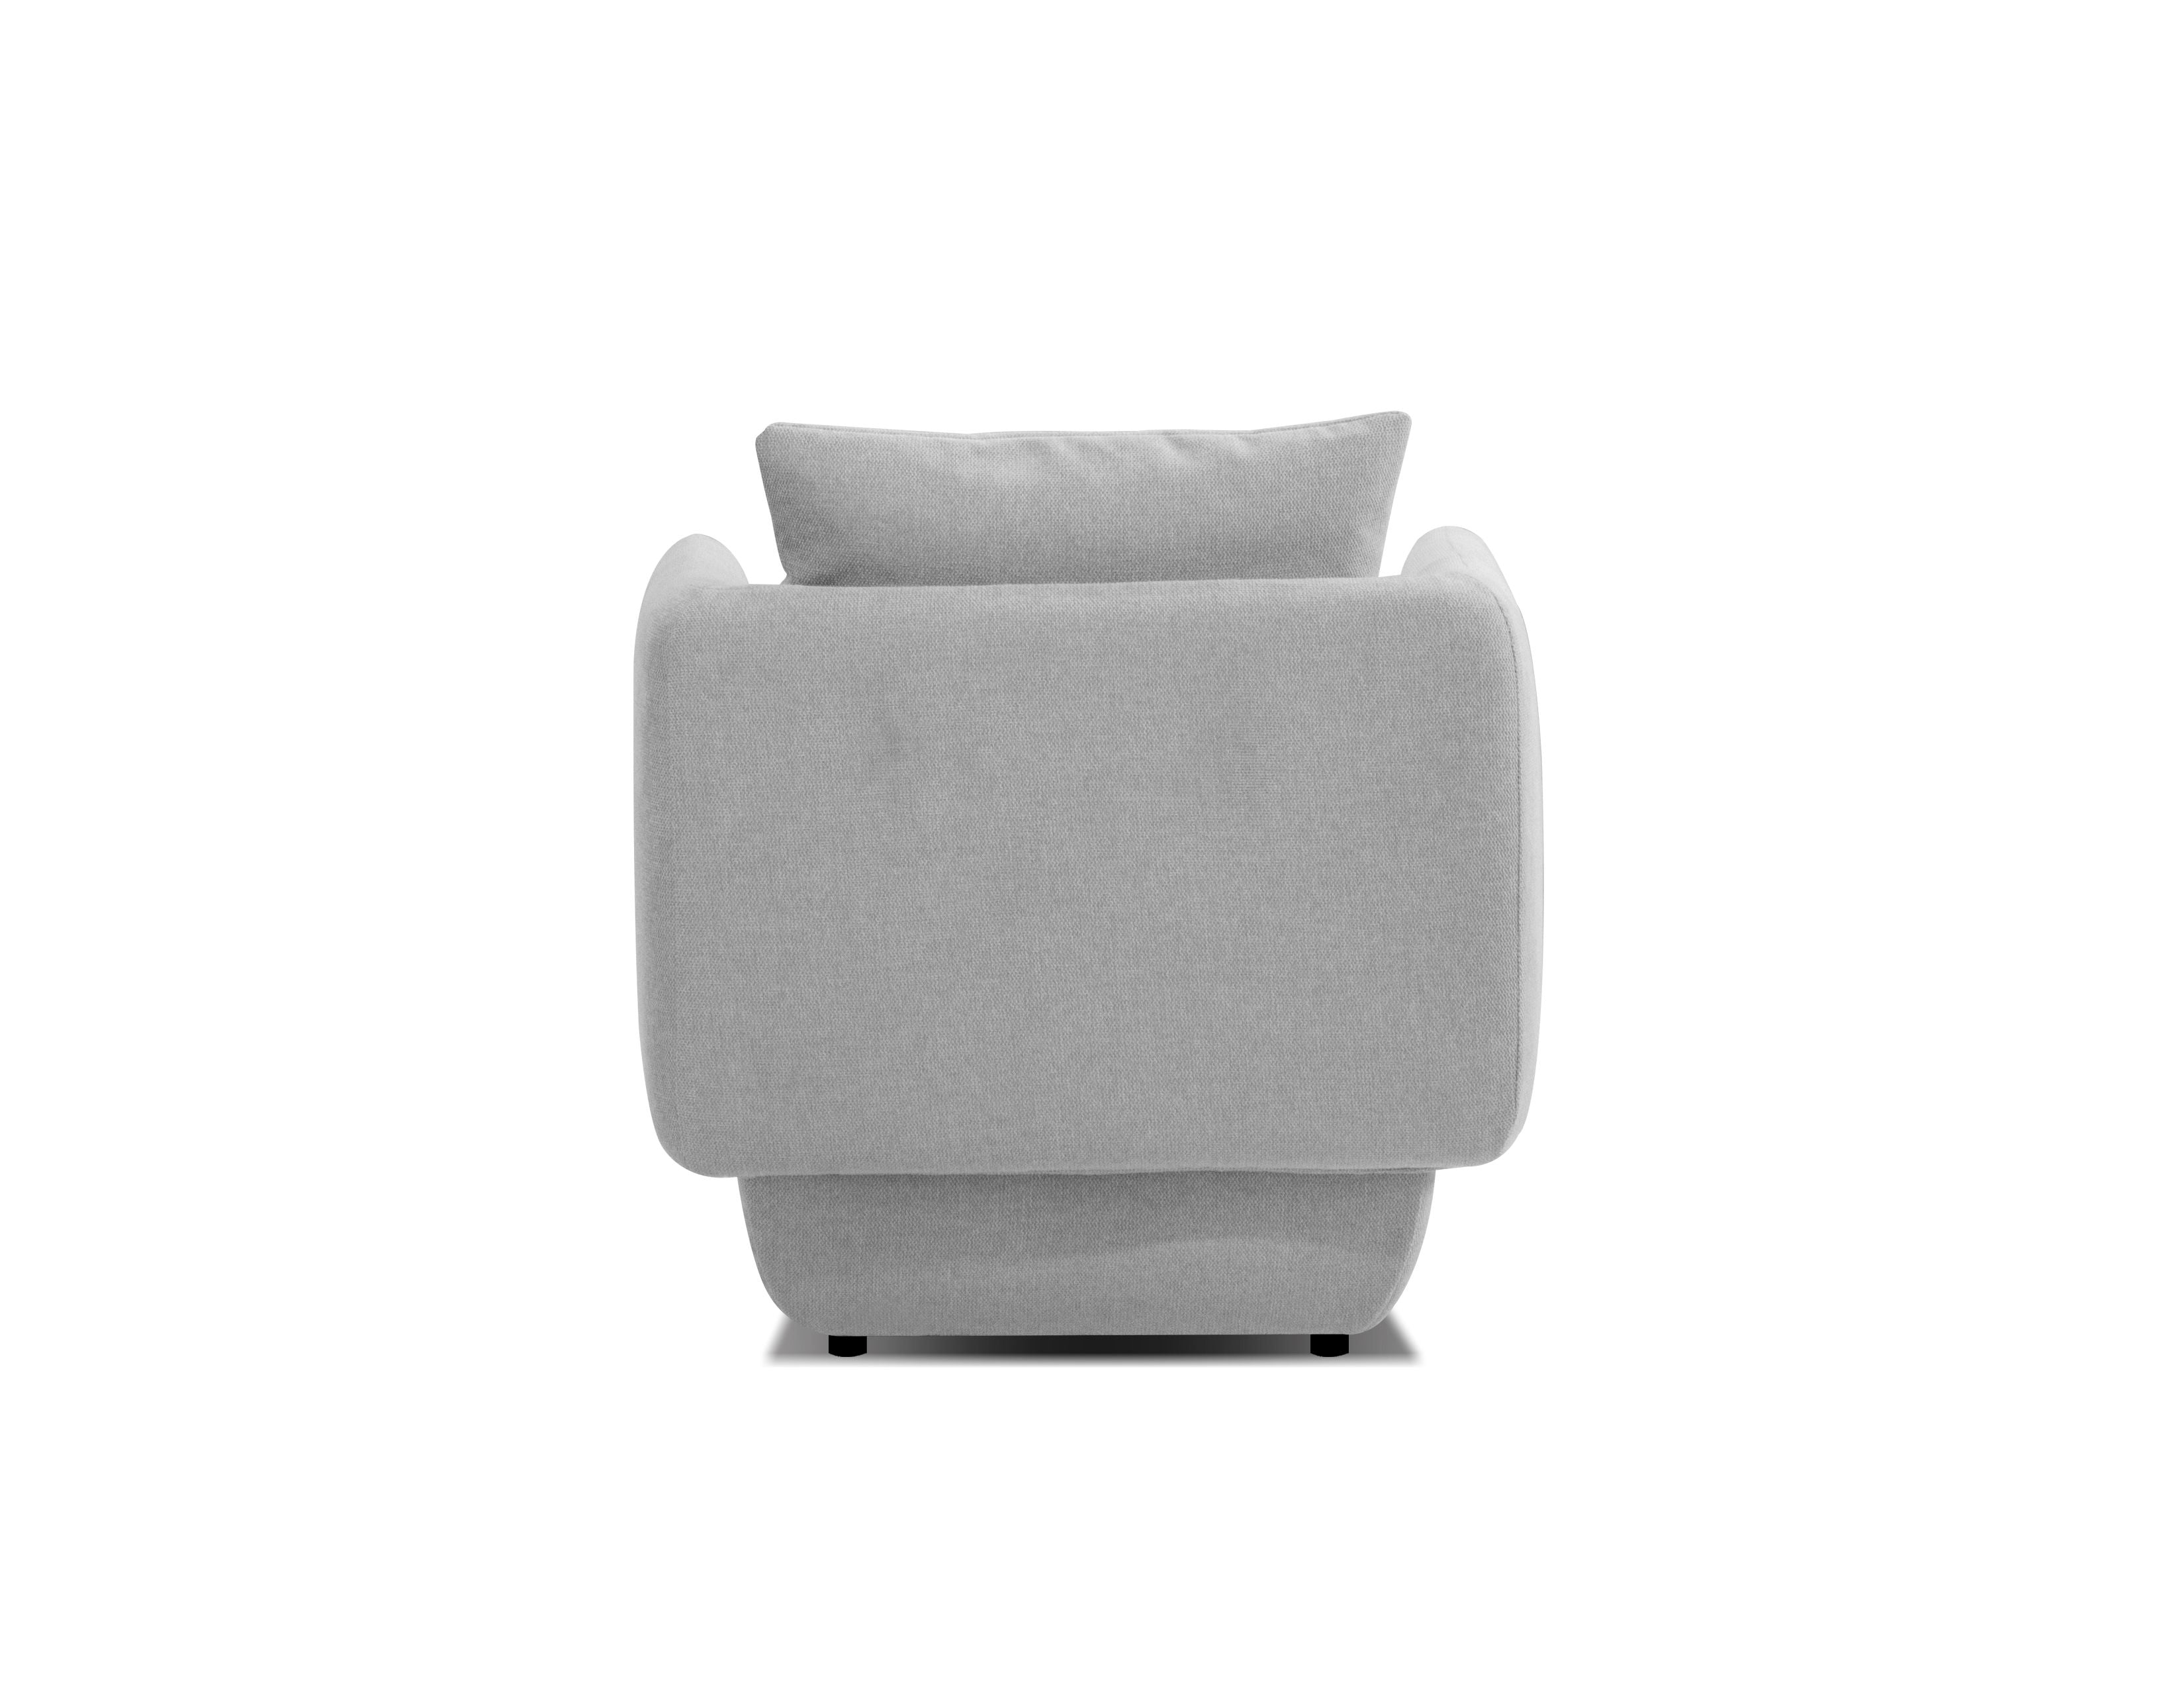 PROBE Occasional Chair in Heather Grey Chenille